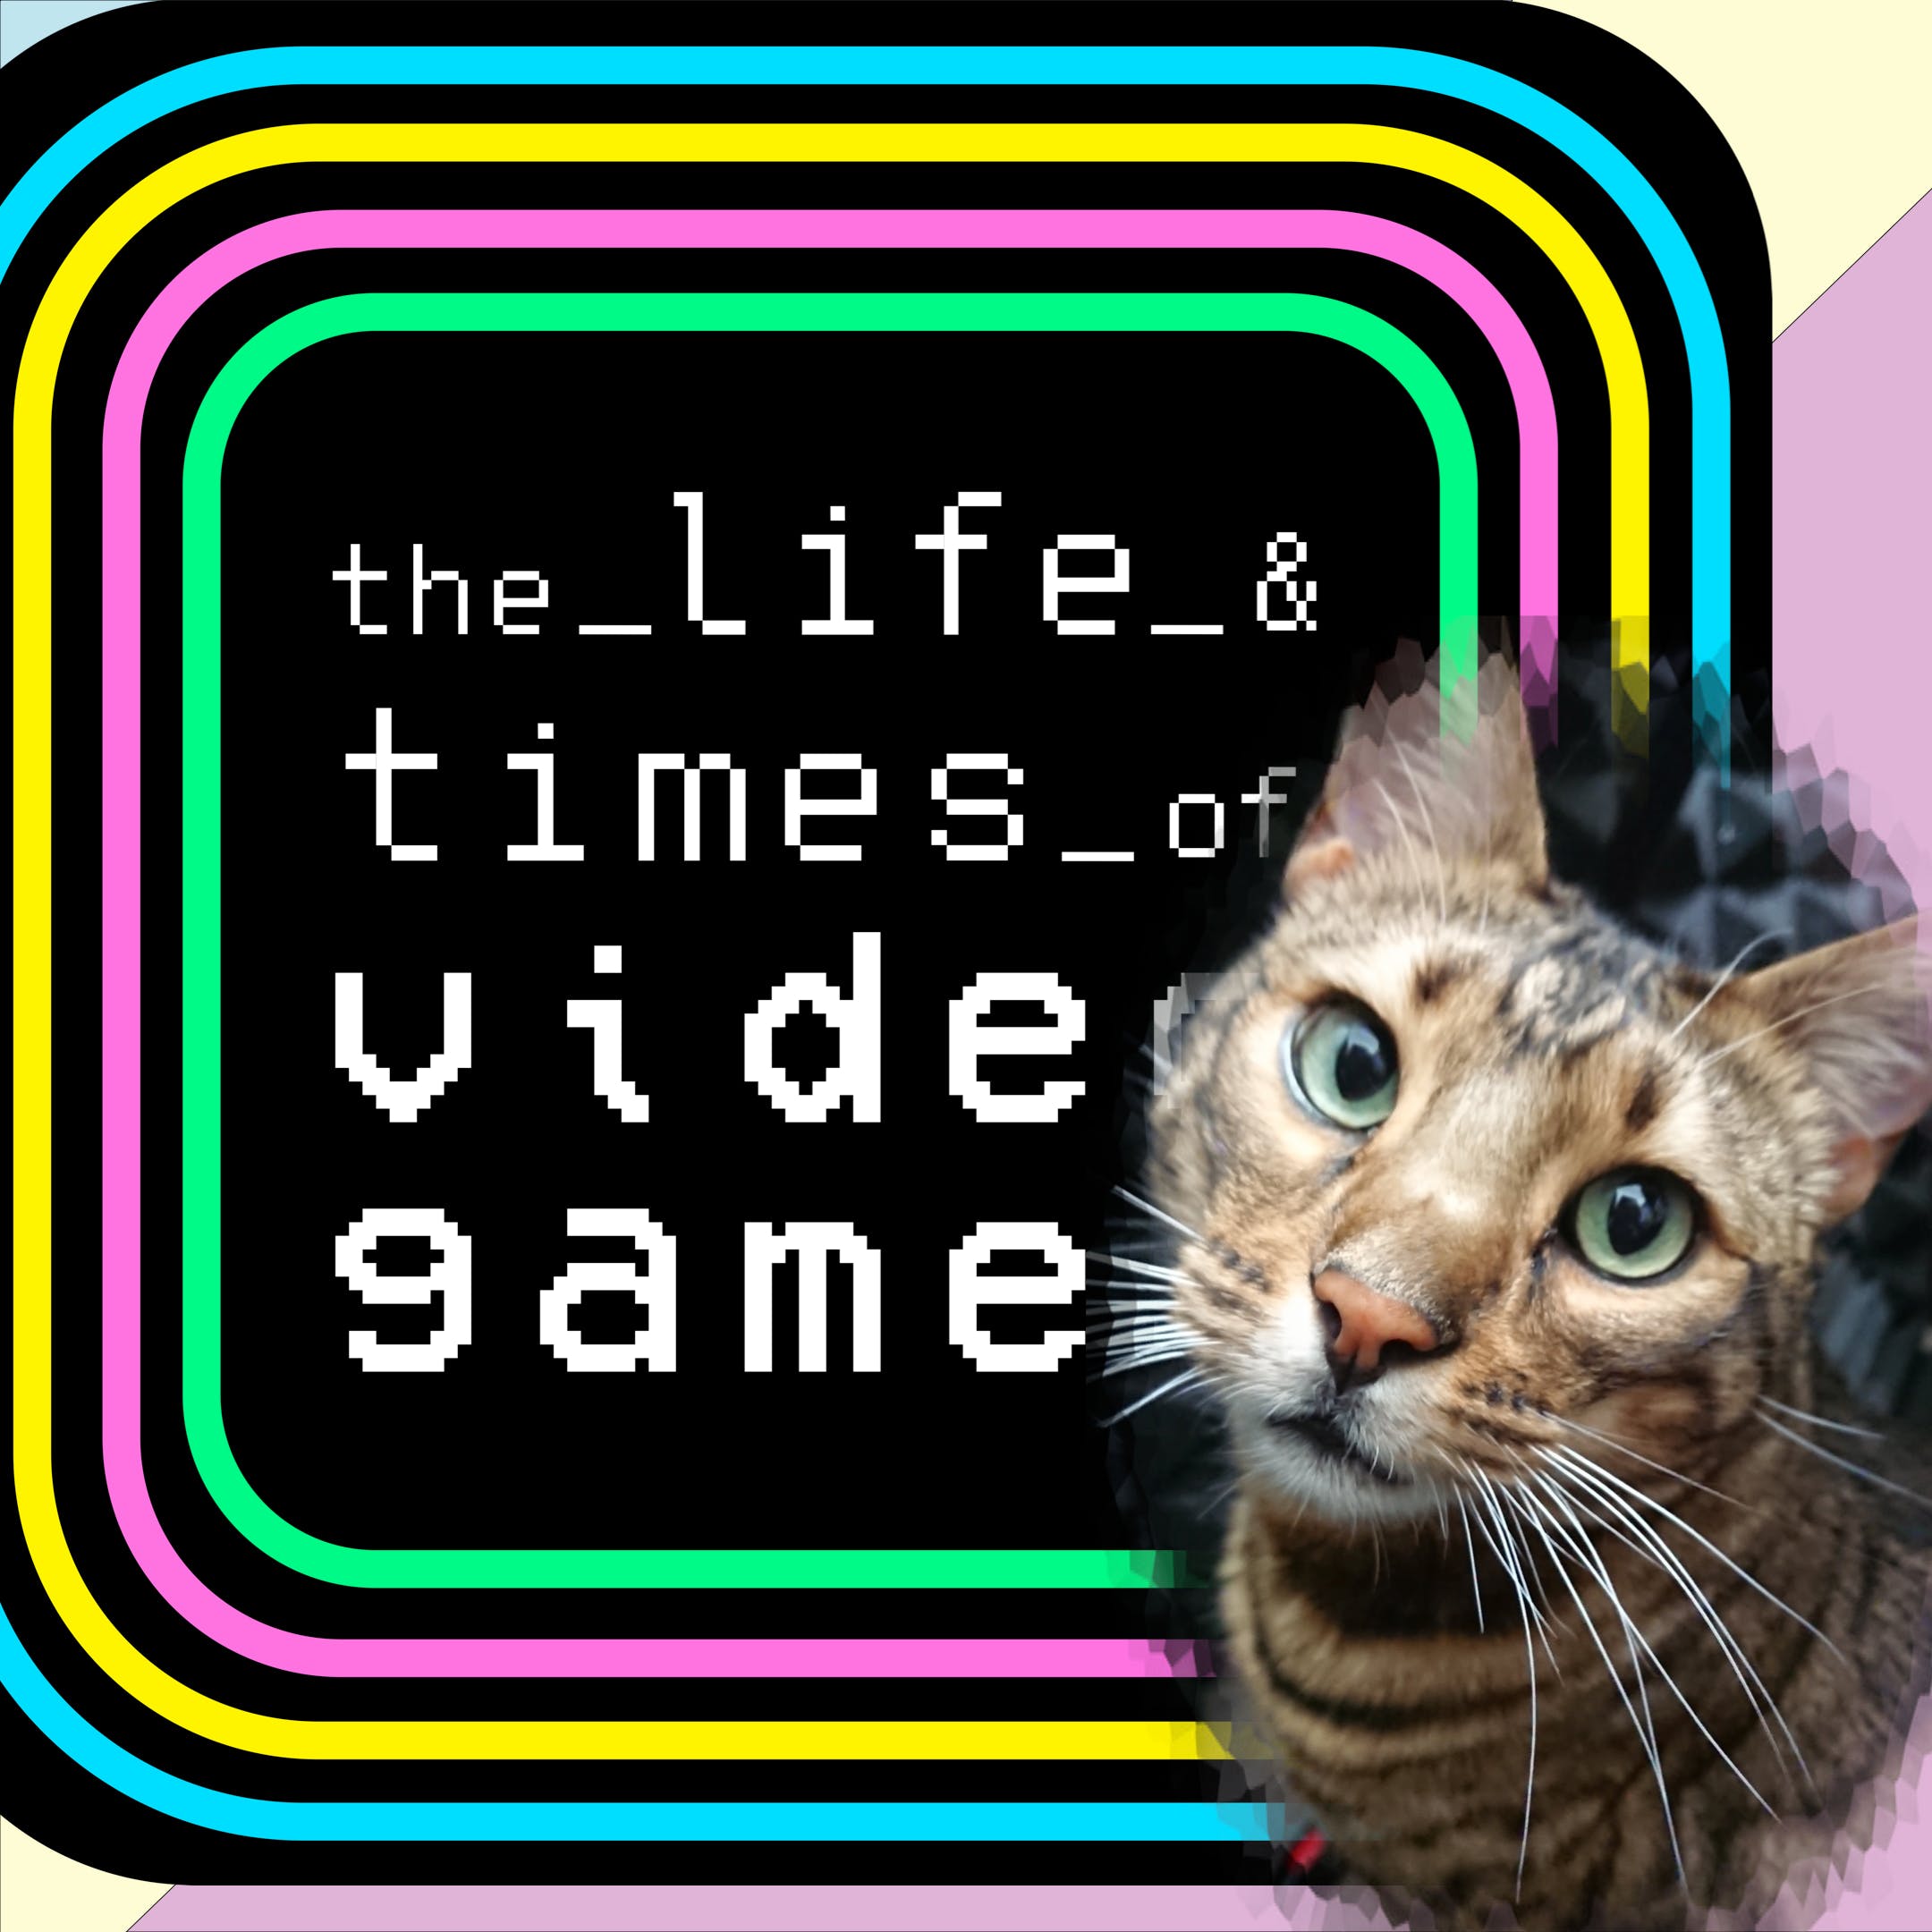 Artwork for podcast The Life & Times of Video Games